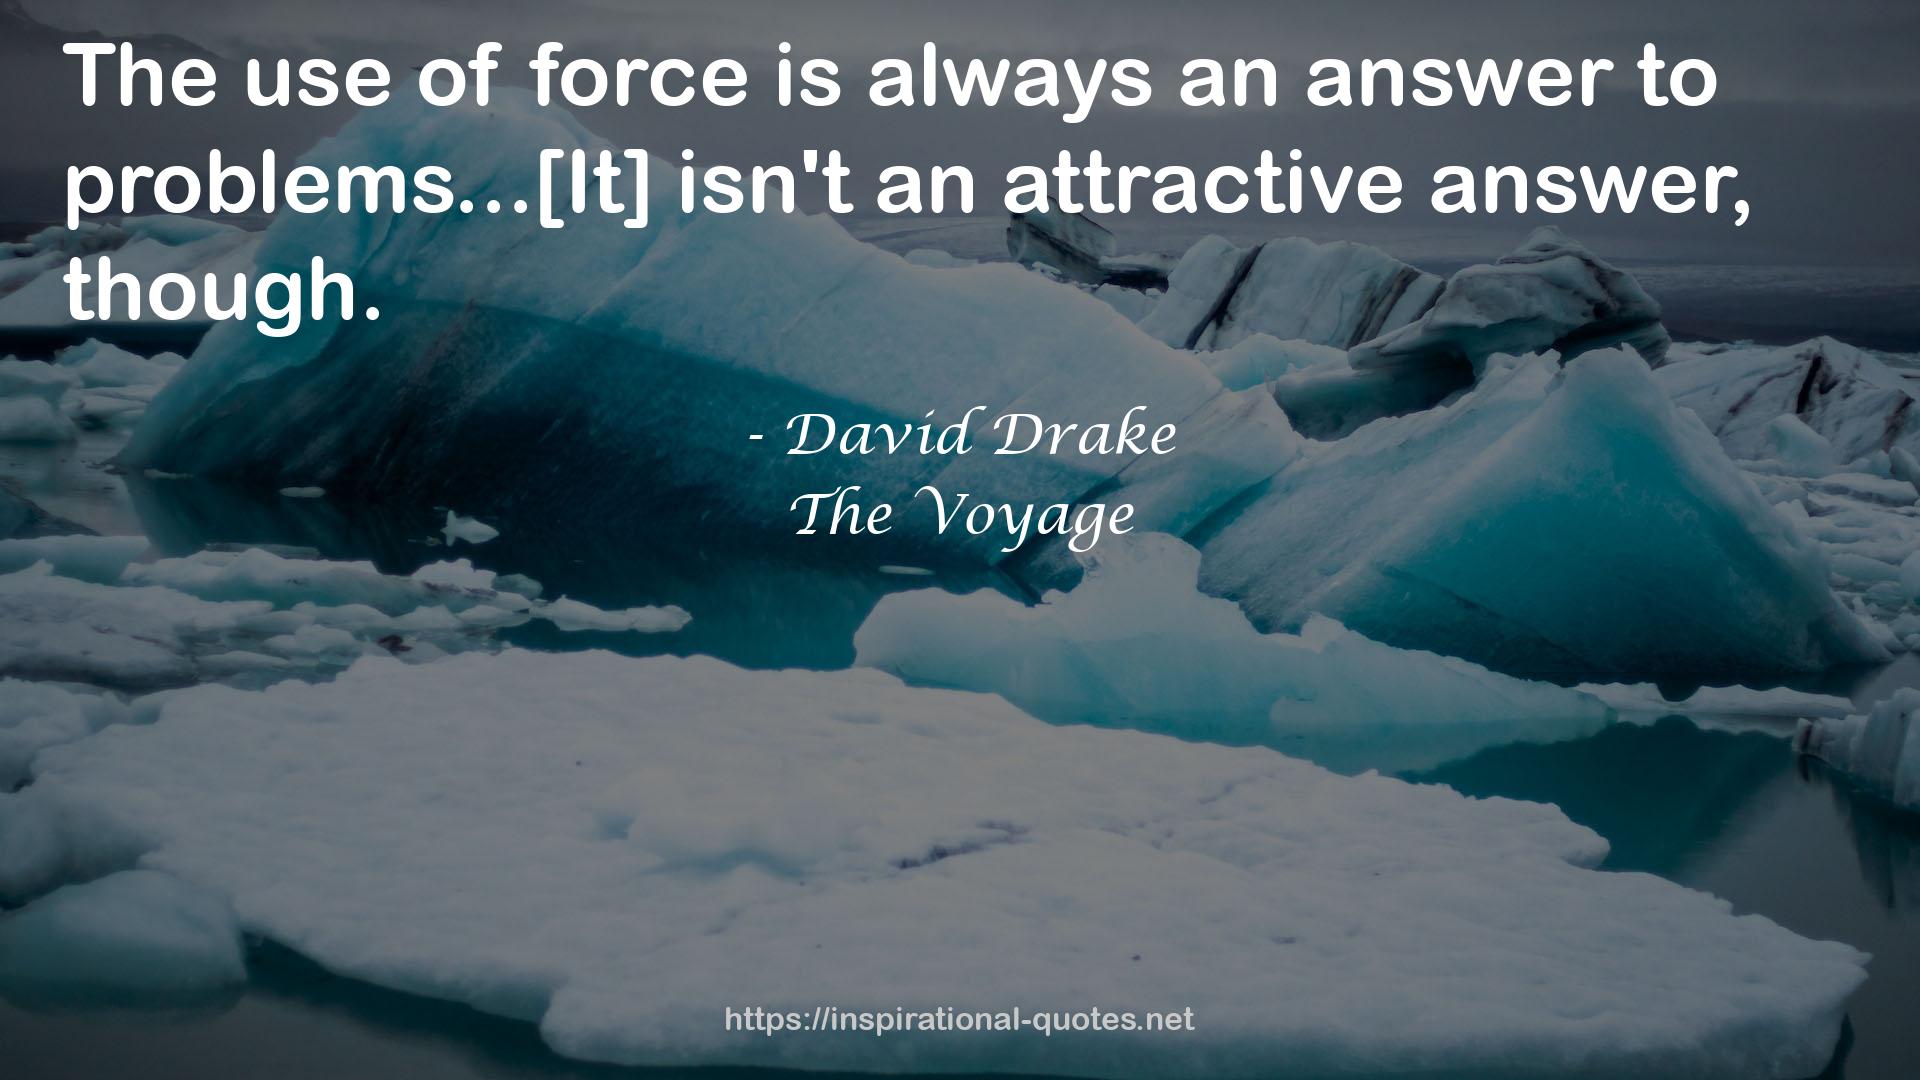 The Voyage QUOTES